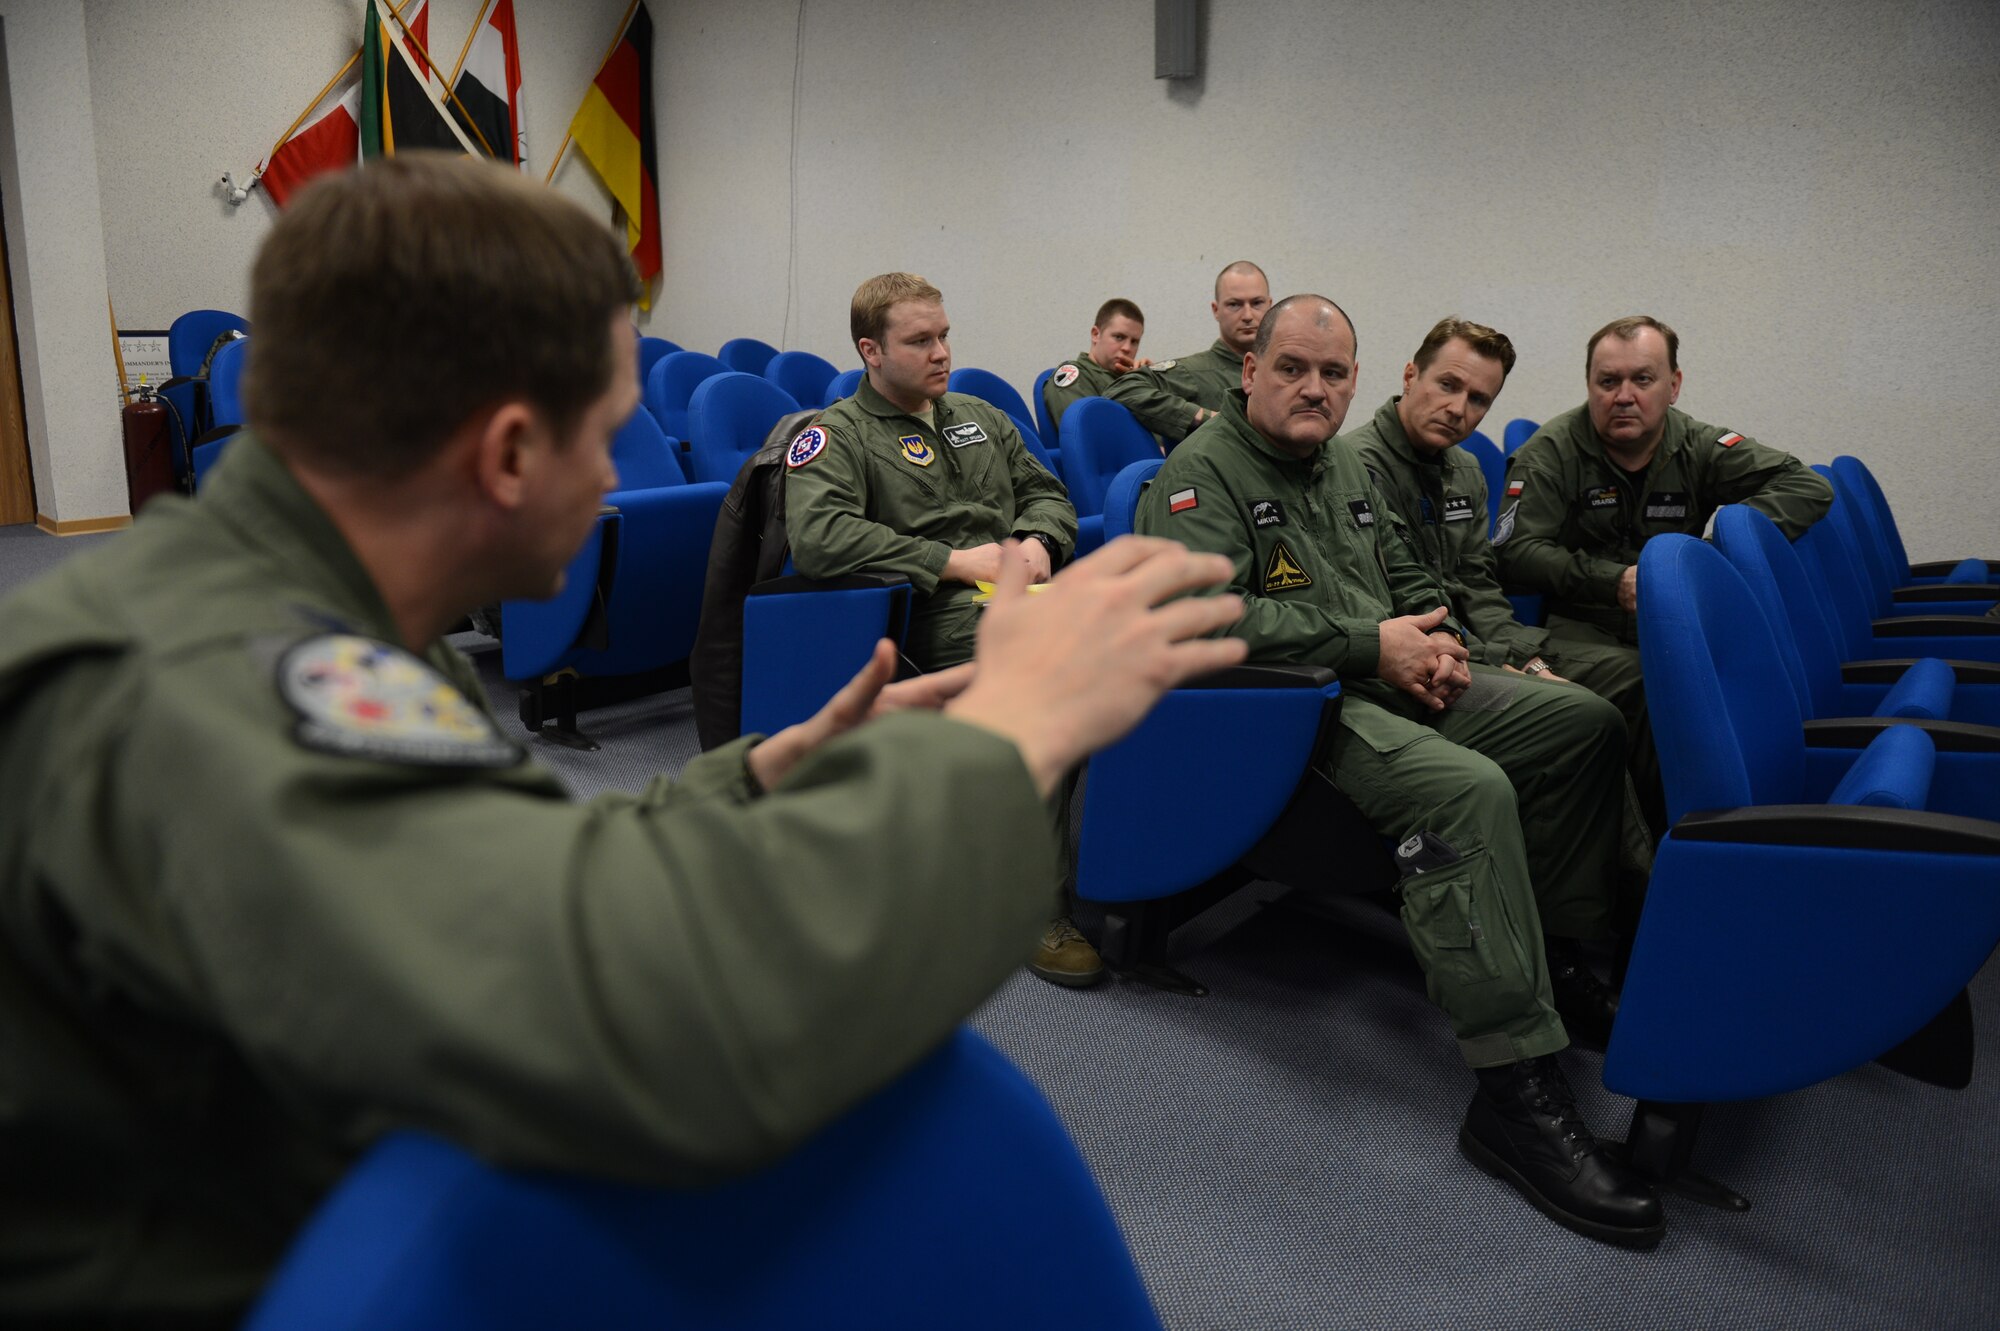 SPANGDAHLEM AIR BASE, Germany – Polish air force leadership listen during a briefing inside the 480th Fighter Squadron Nov. 26, 2012.  The briefing was part of a two-day tour for leadership from the Polish air force to visit Spangdahlem AB with hopes of strengthening the enduring partnership between NATO allies. (U.S. Air Force photo by Airman 1st Class Gustavo Castillo/Released)